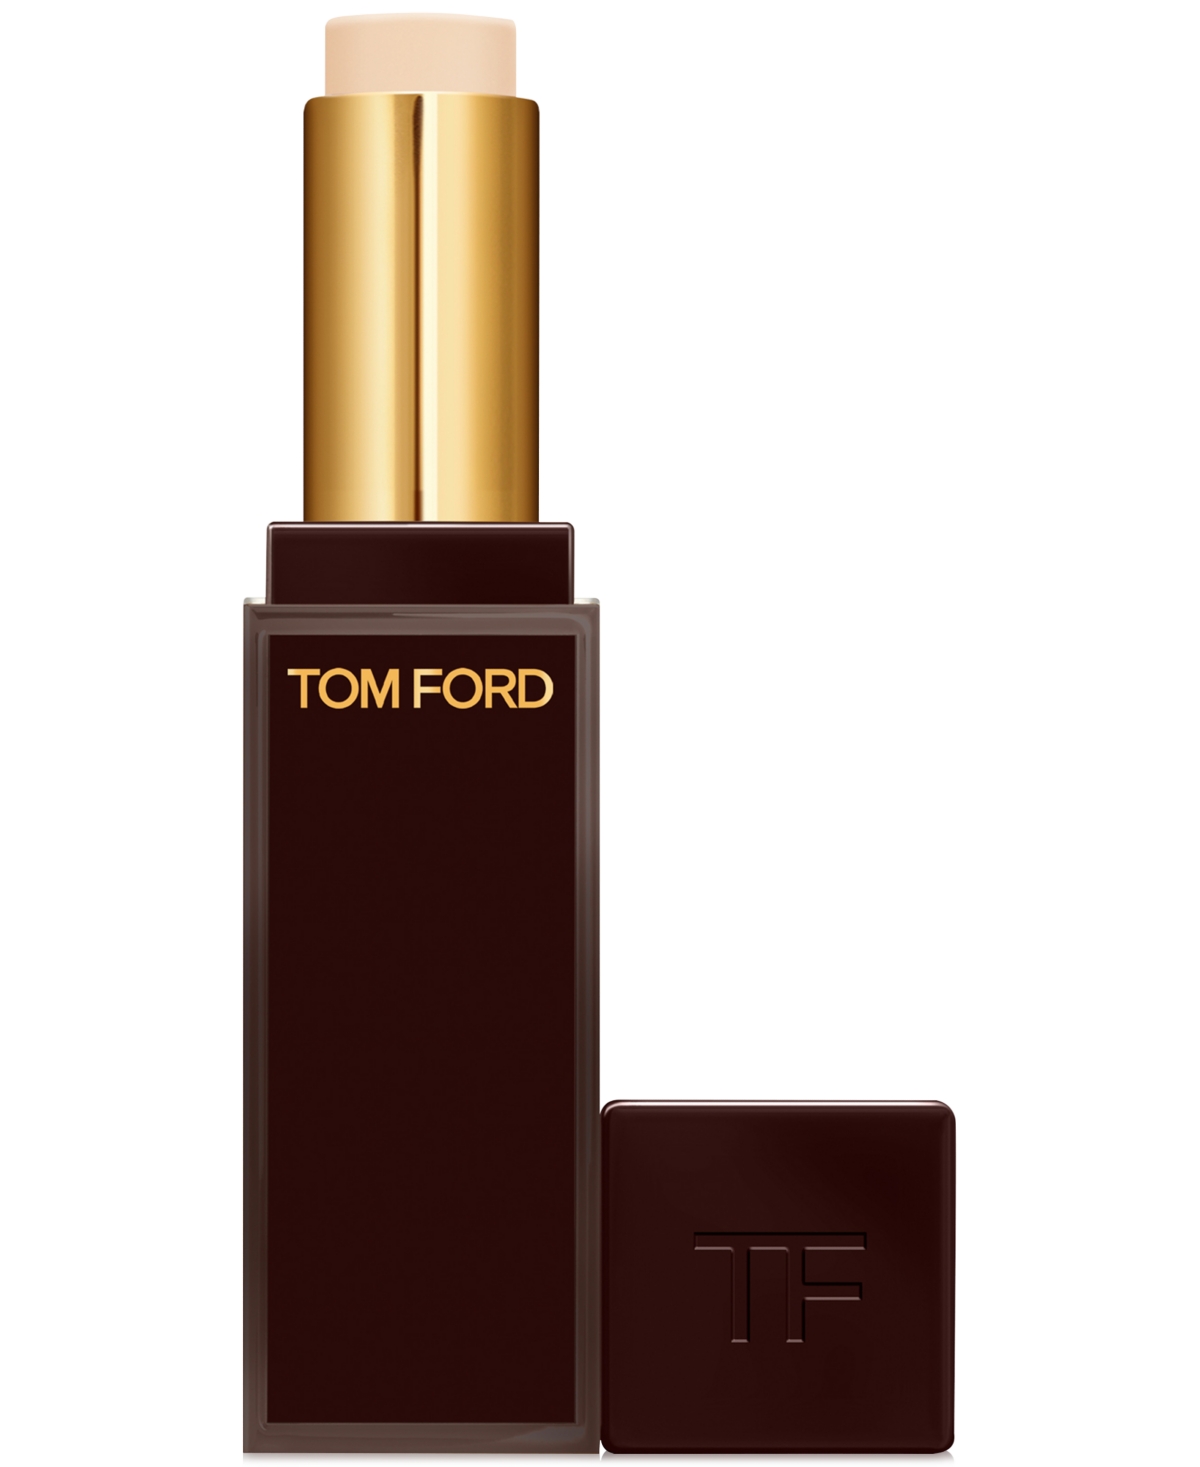 Tom Ford Traceless Soft Matte Concealer In N Blanc (fair Skin With Neutral Underton